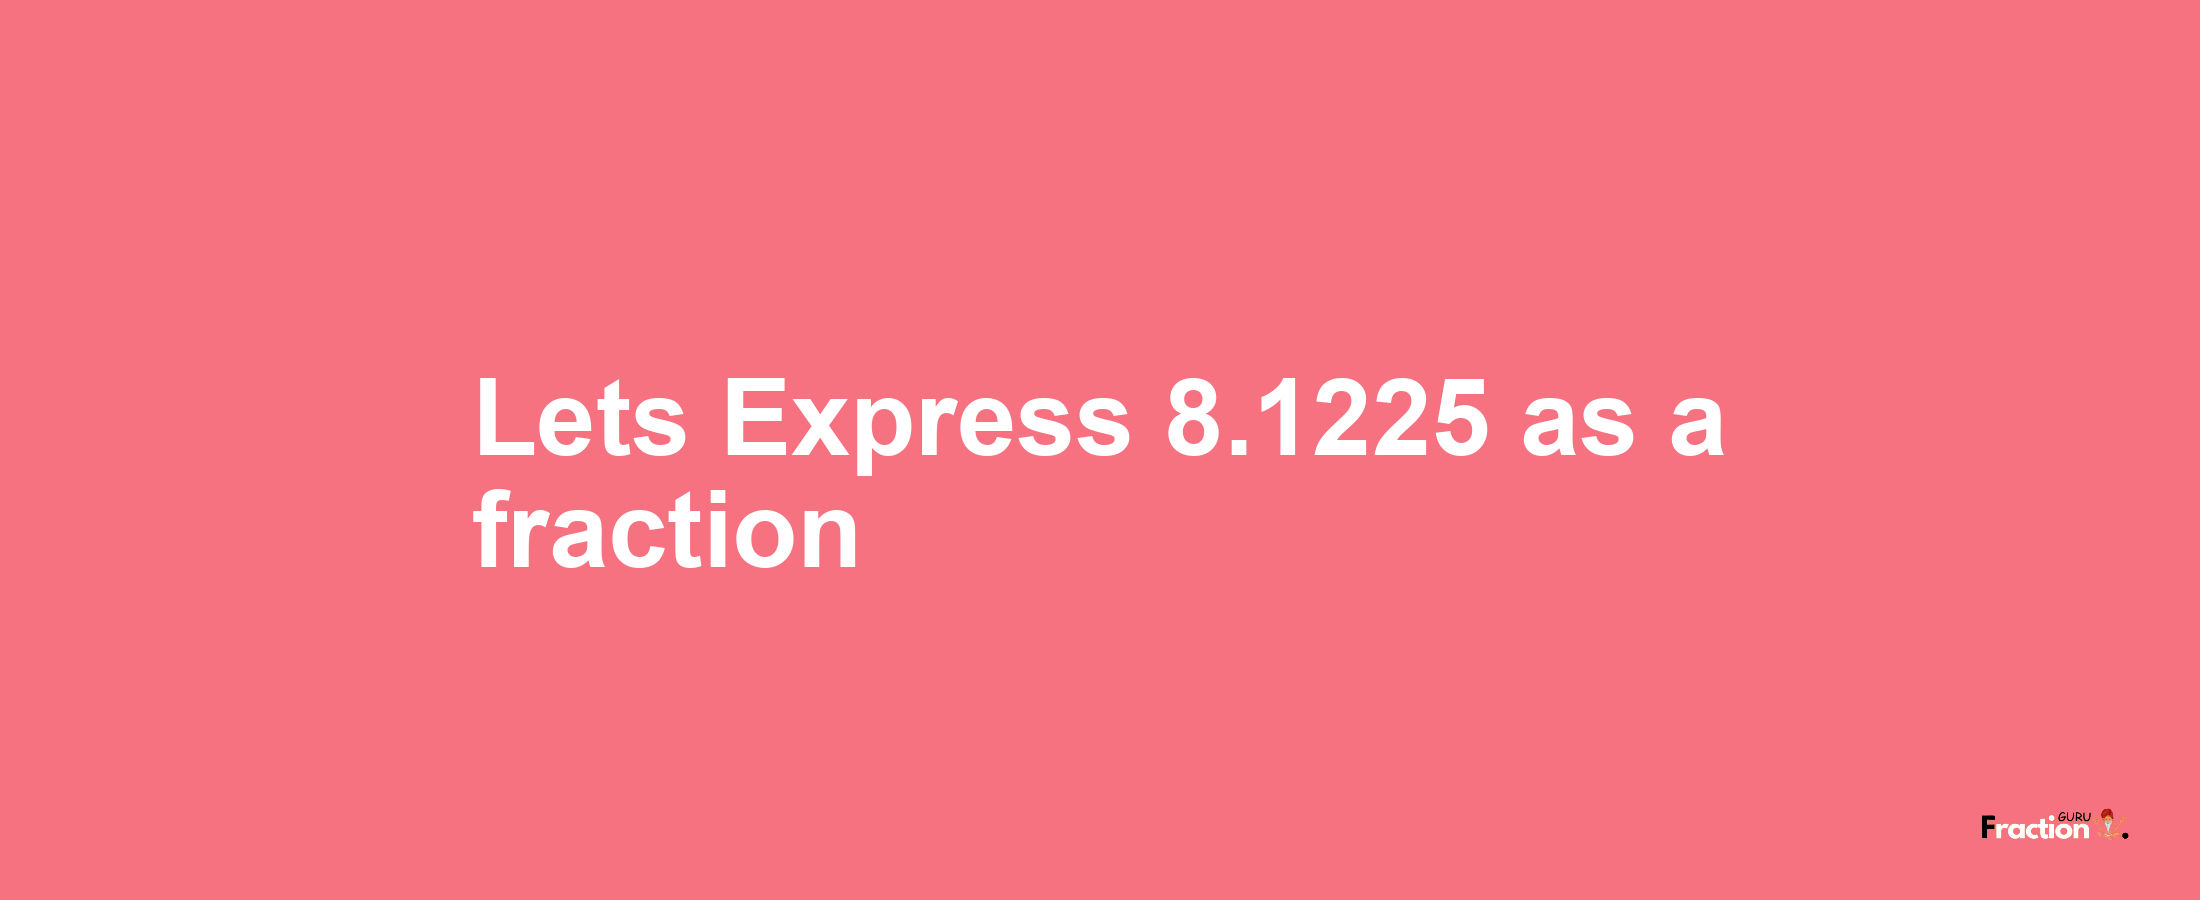 Lets Express 8.1225 as afraction